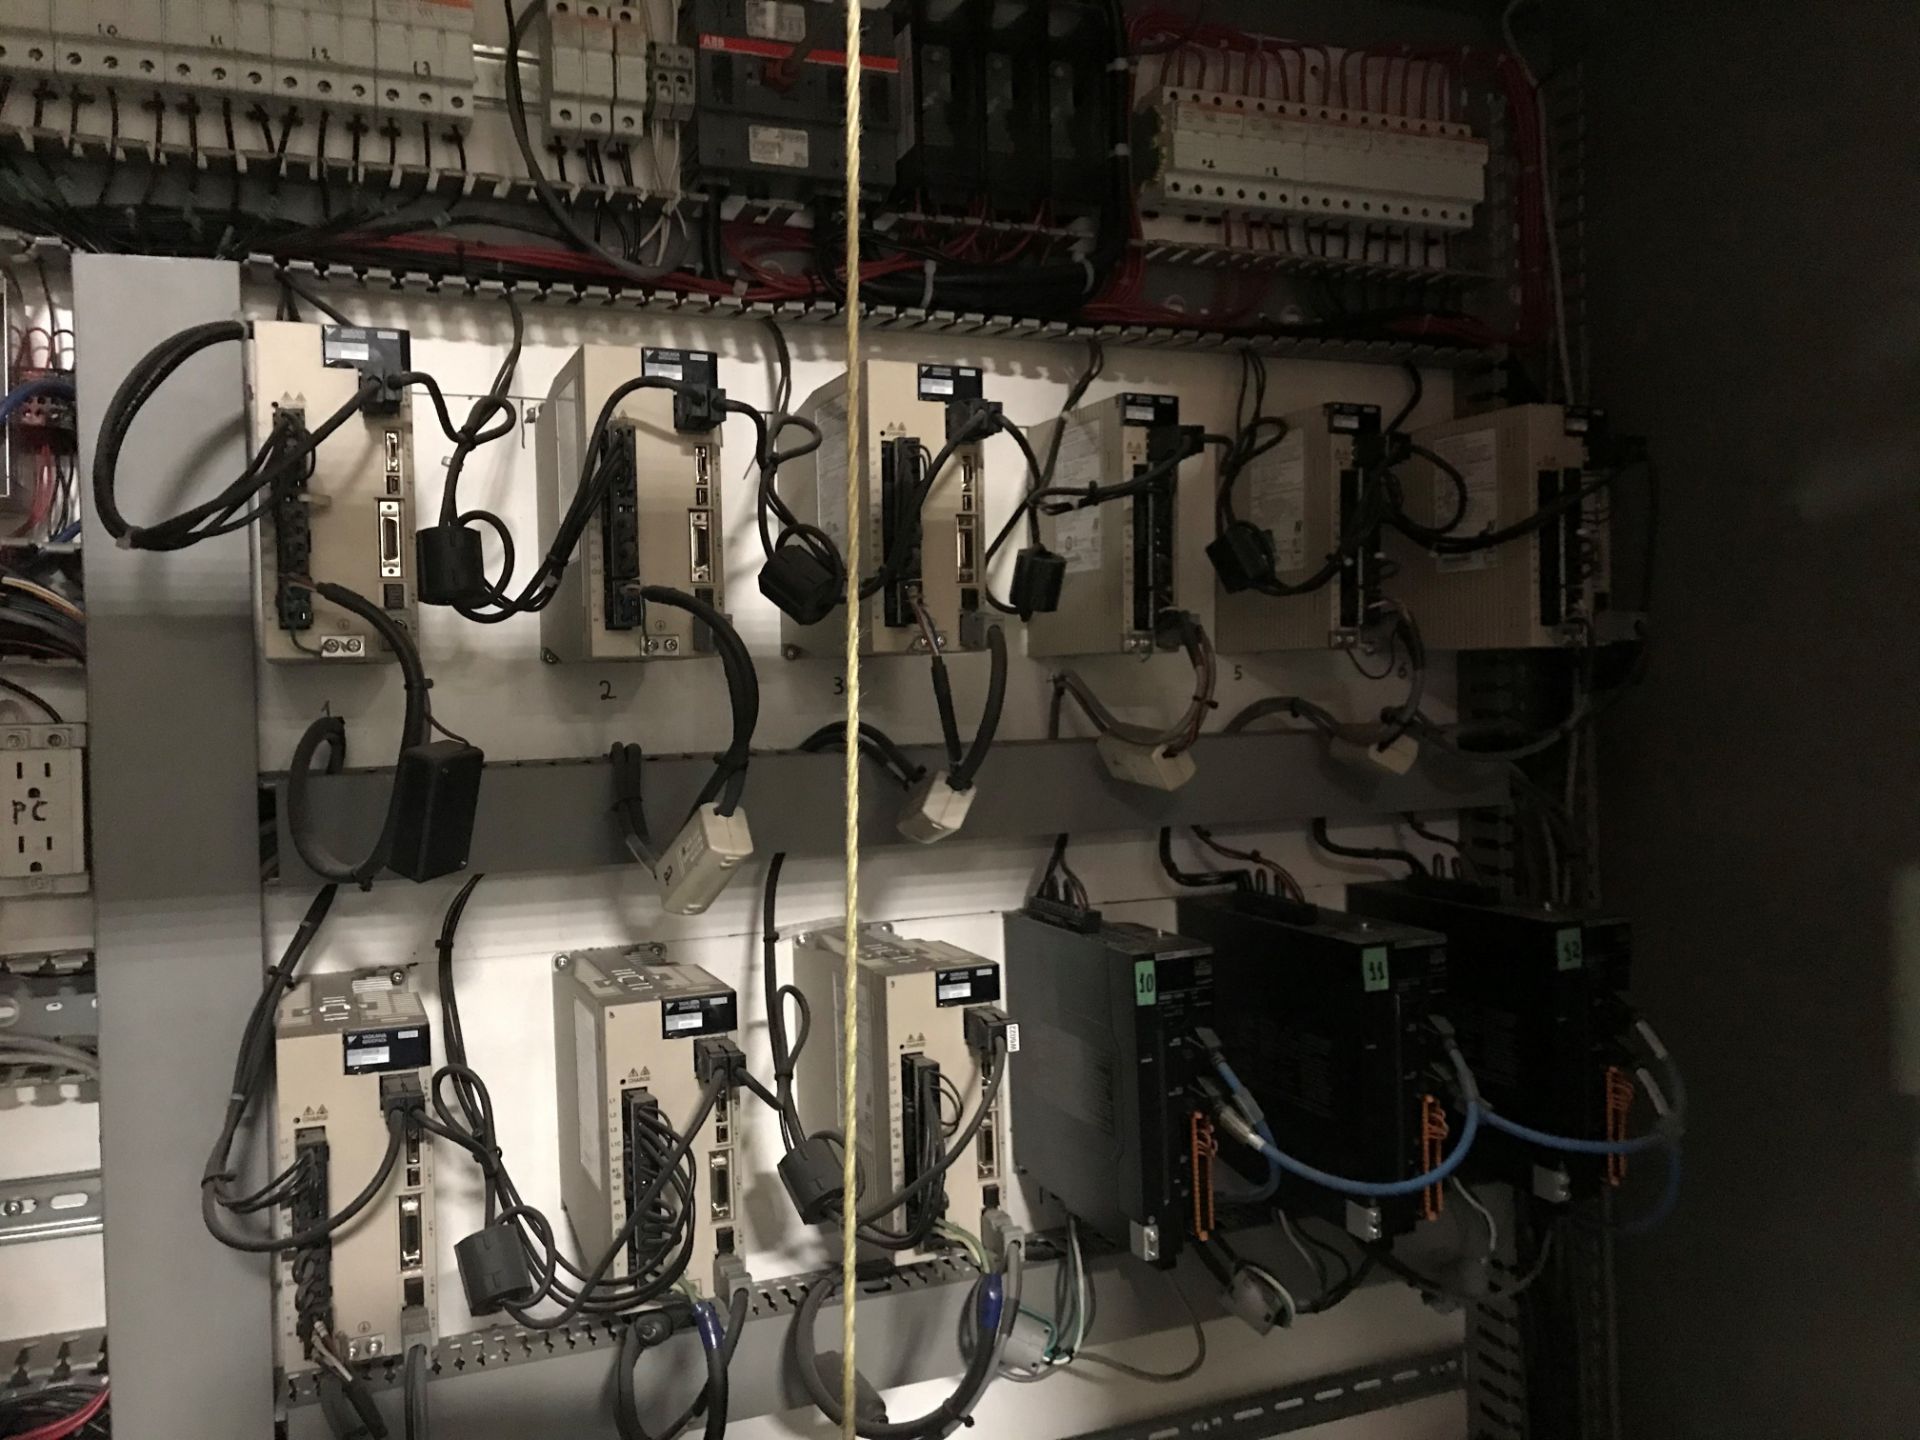 electric panel - Image 4 of 8